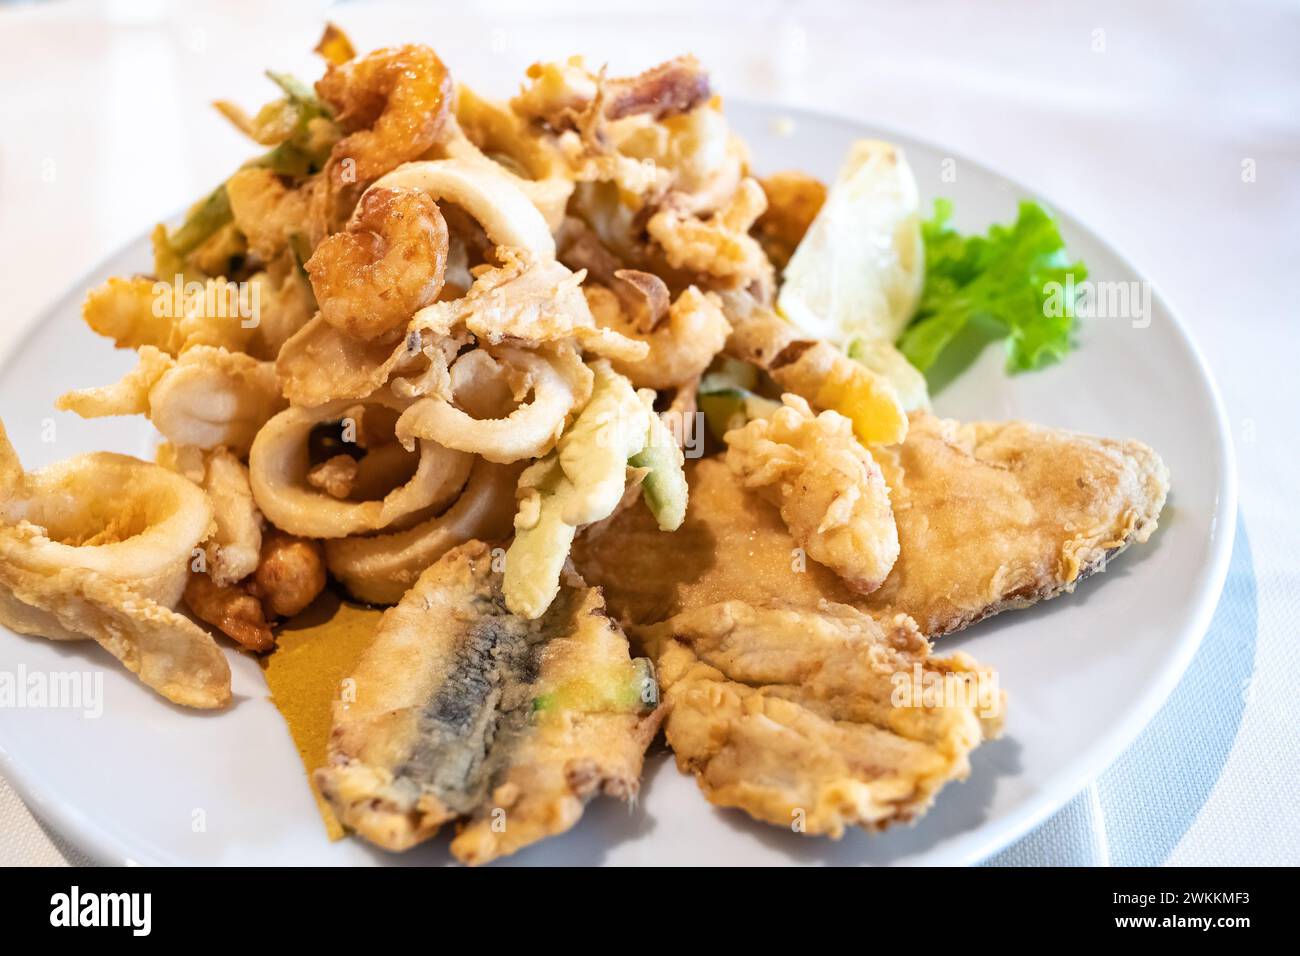 Mixed deep-fried fish, shrimp and squid platter Stock Photo